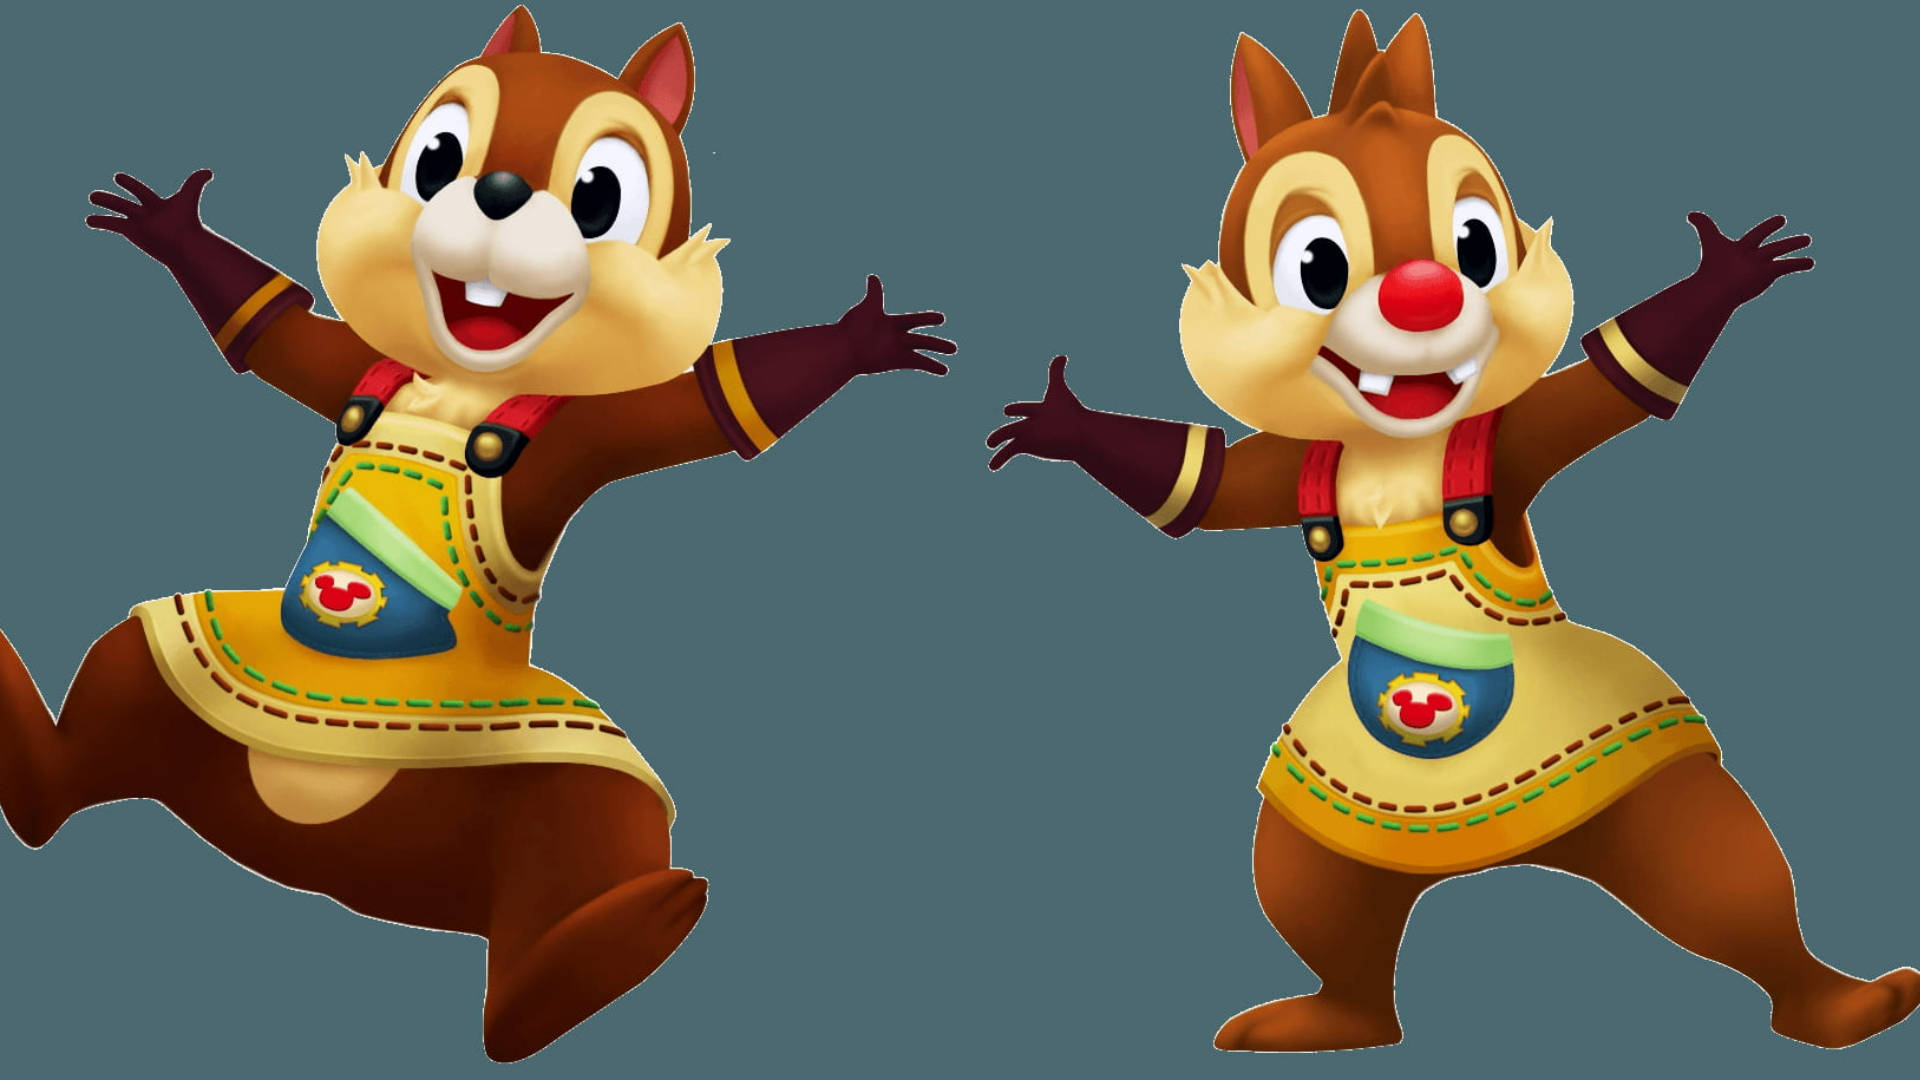 "Chip 'n Dale Rescue Rangers donning Disney aprons" Wallpaper